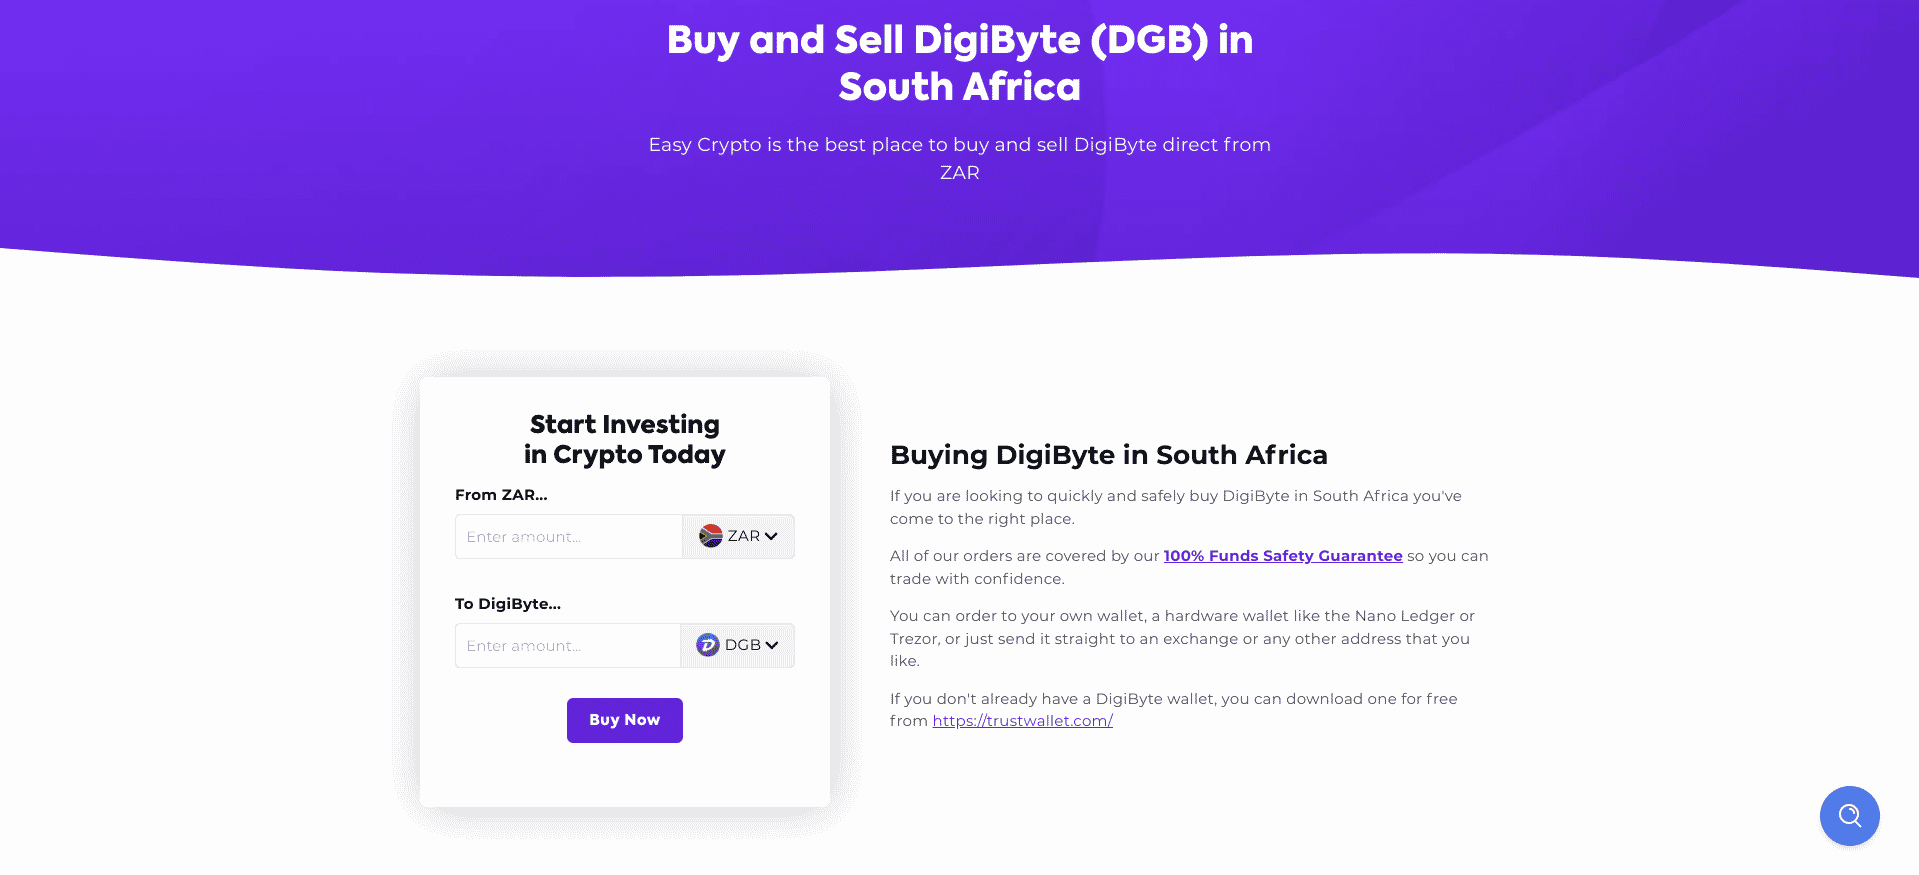 Buy and Sell Digibyte in Easy Crypto